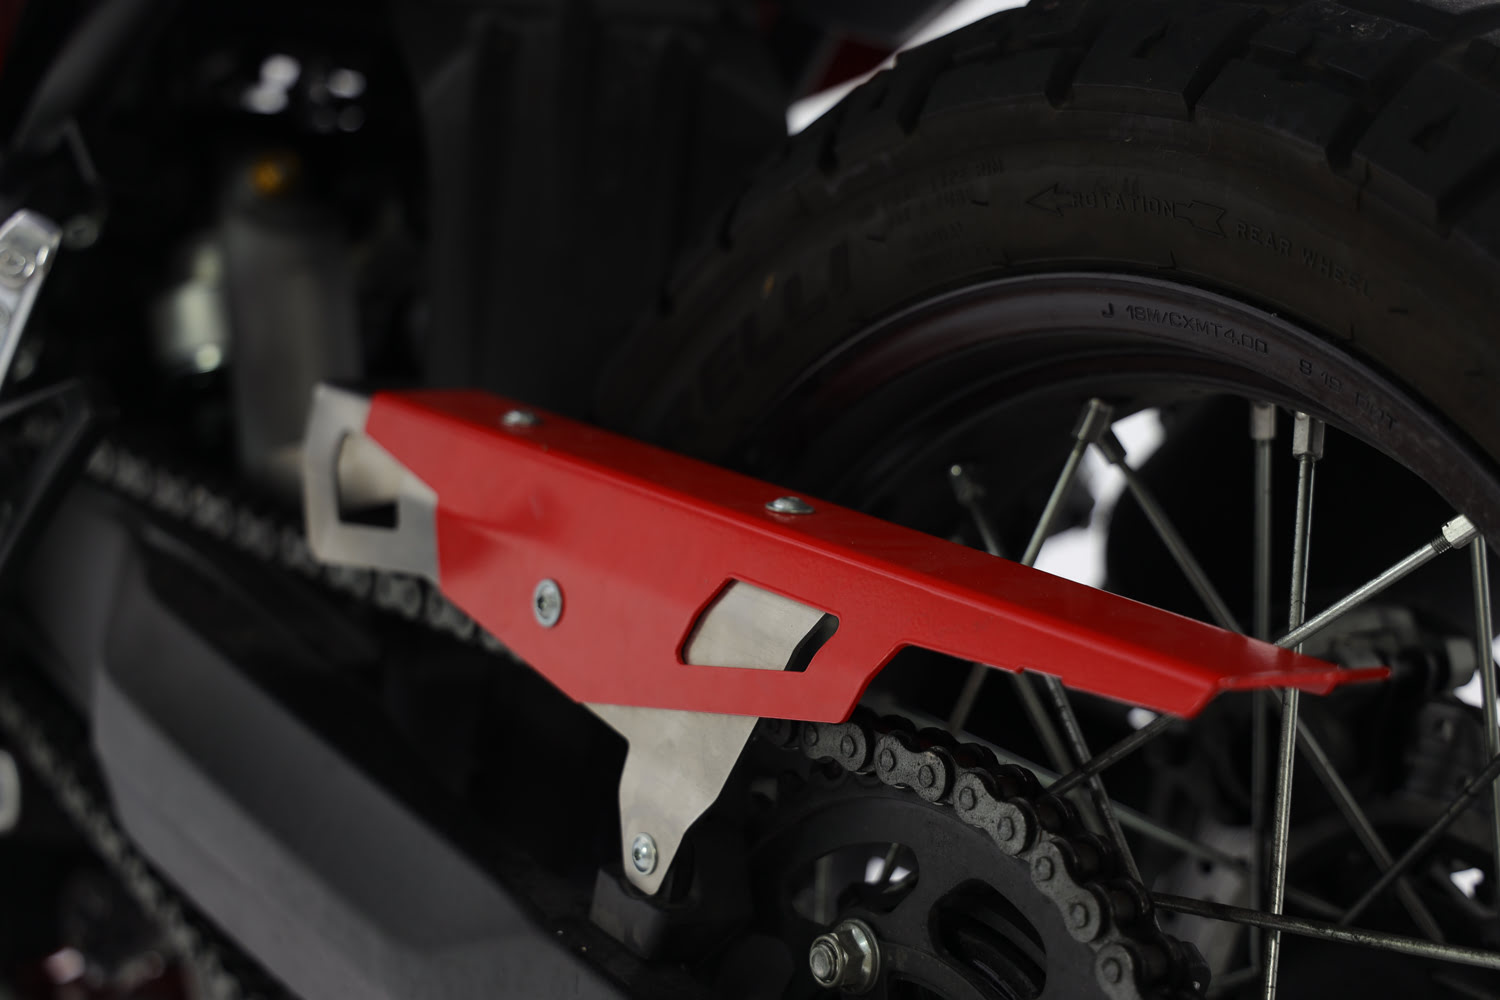 2CP21400550714.JPG - Chain Guard Brushed stainless steel / Red